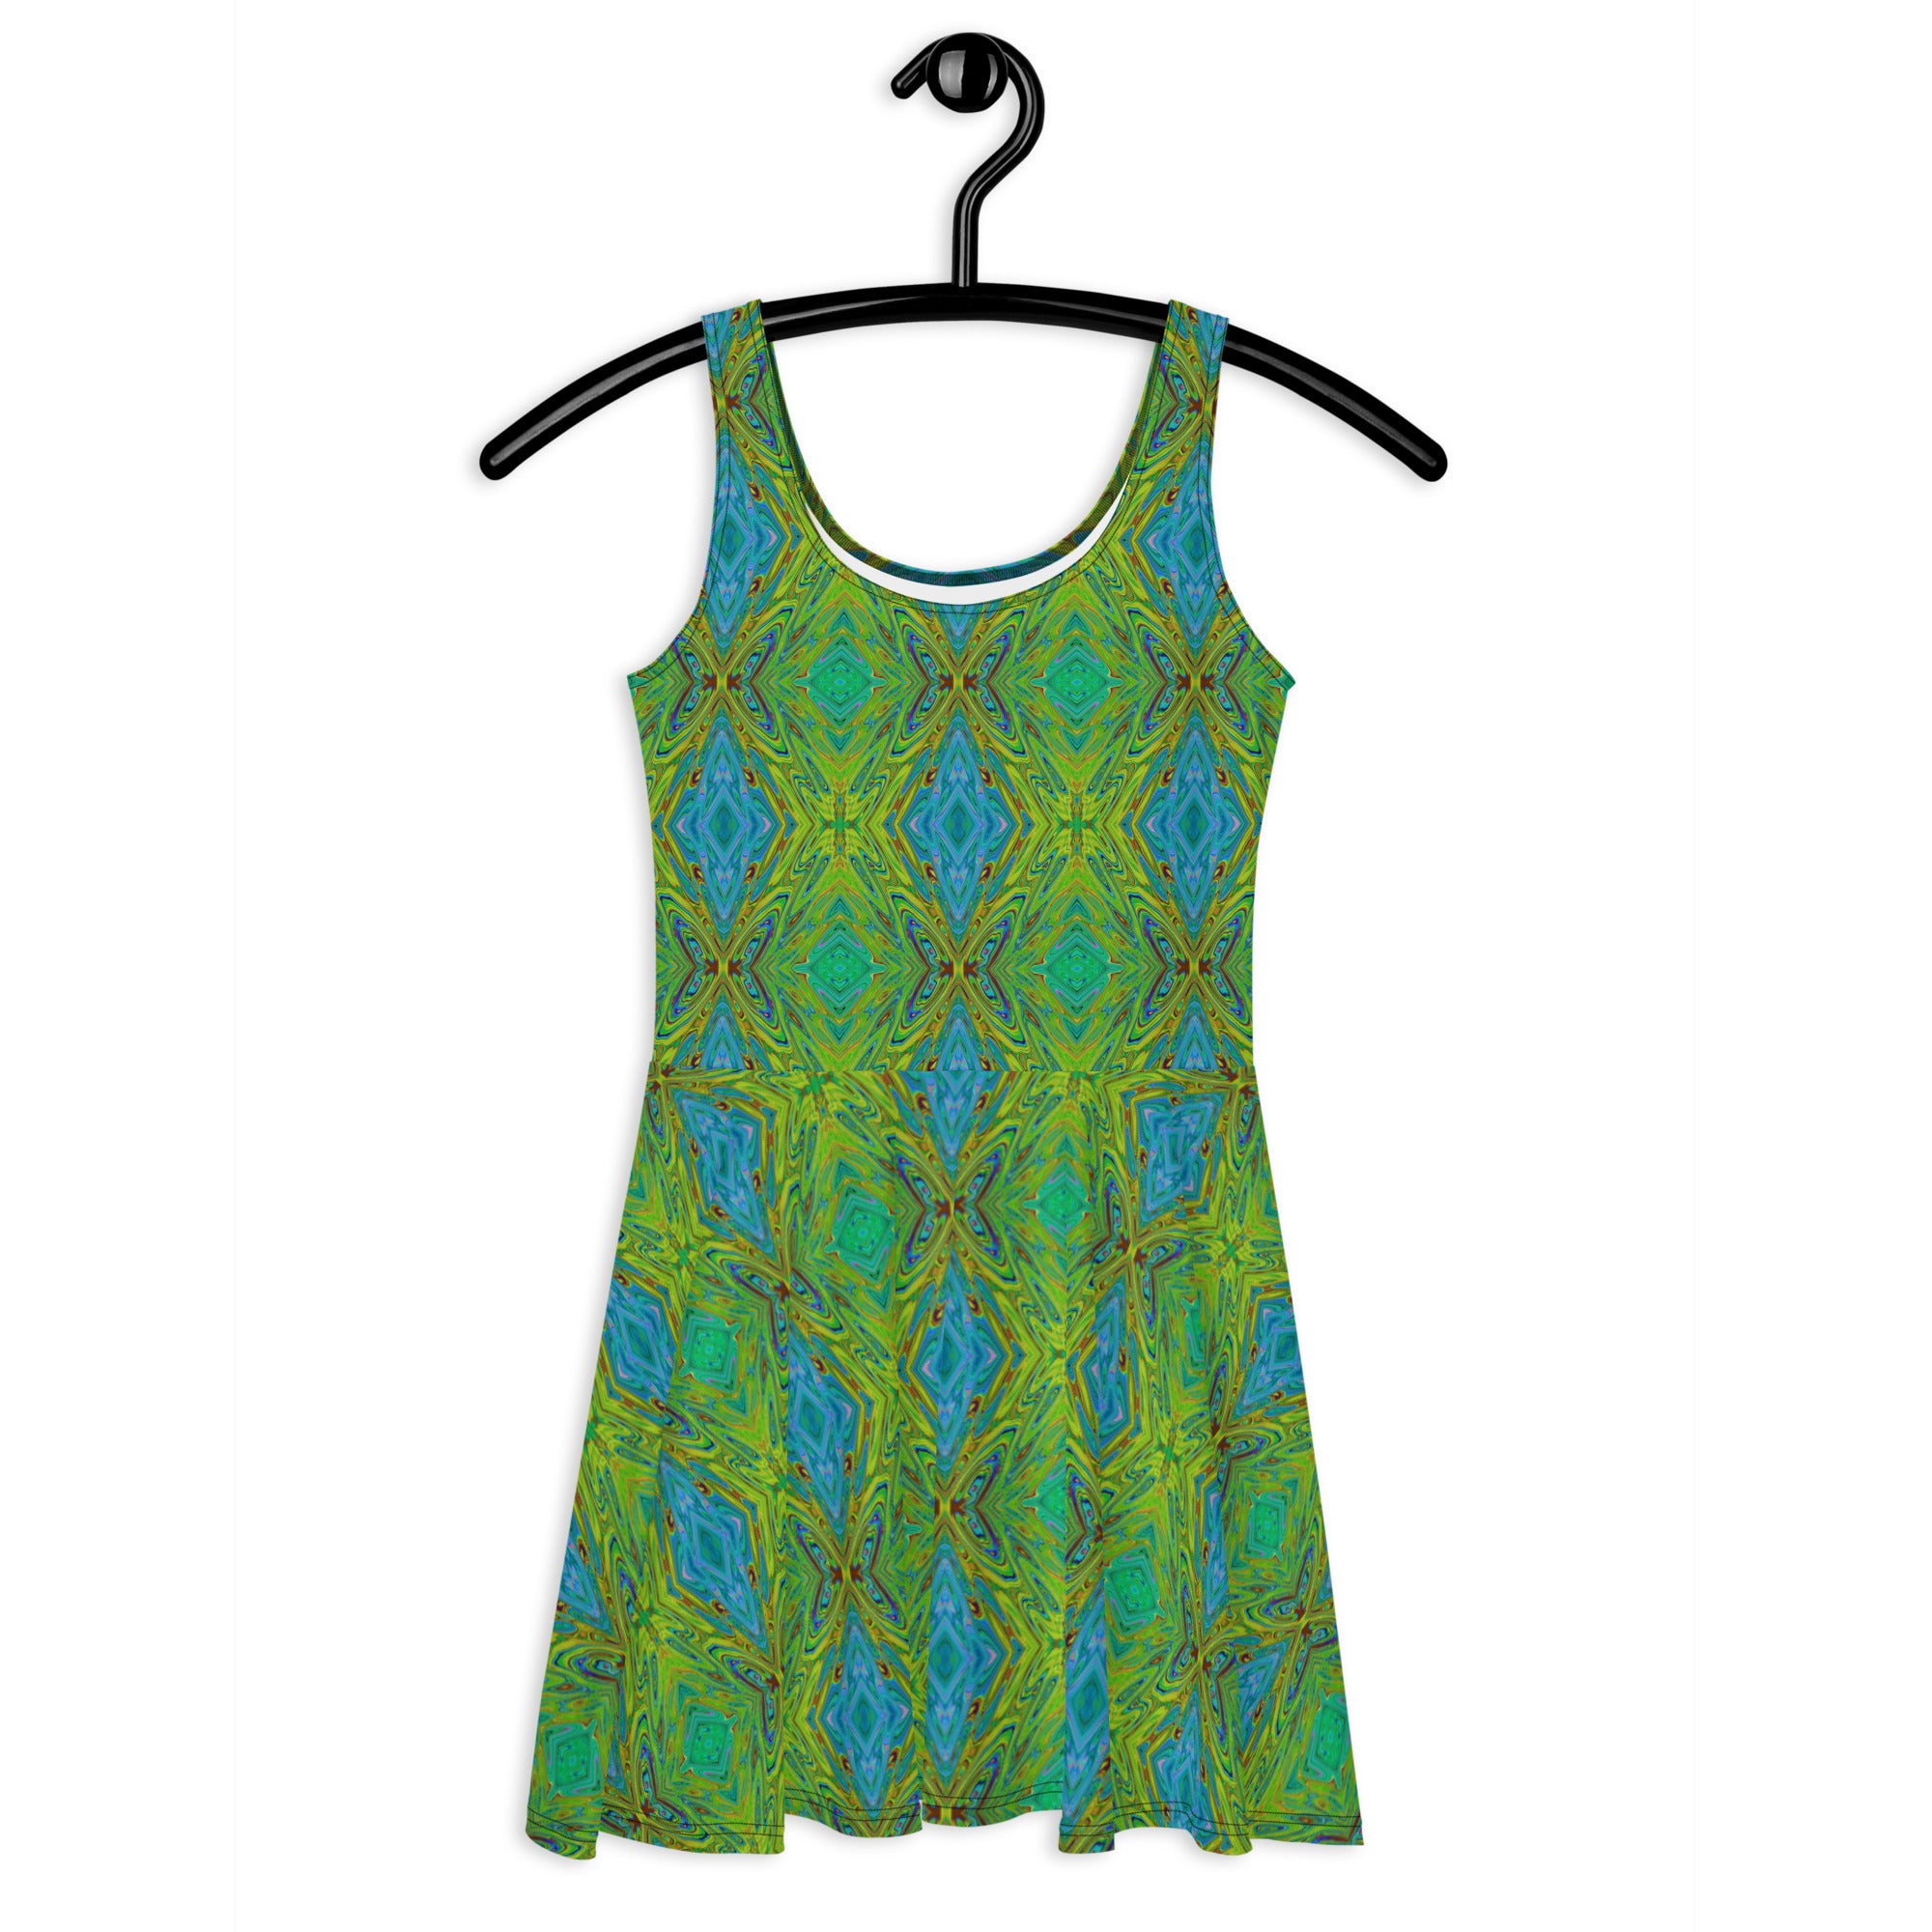 Flared Skater Dress - Trippy Chartreuse and Blue Abstract Butterfly